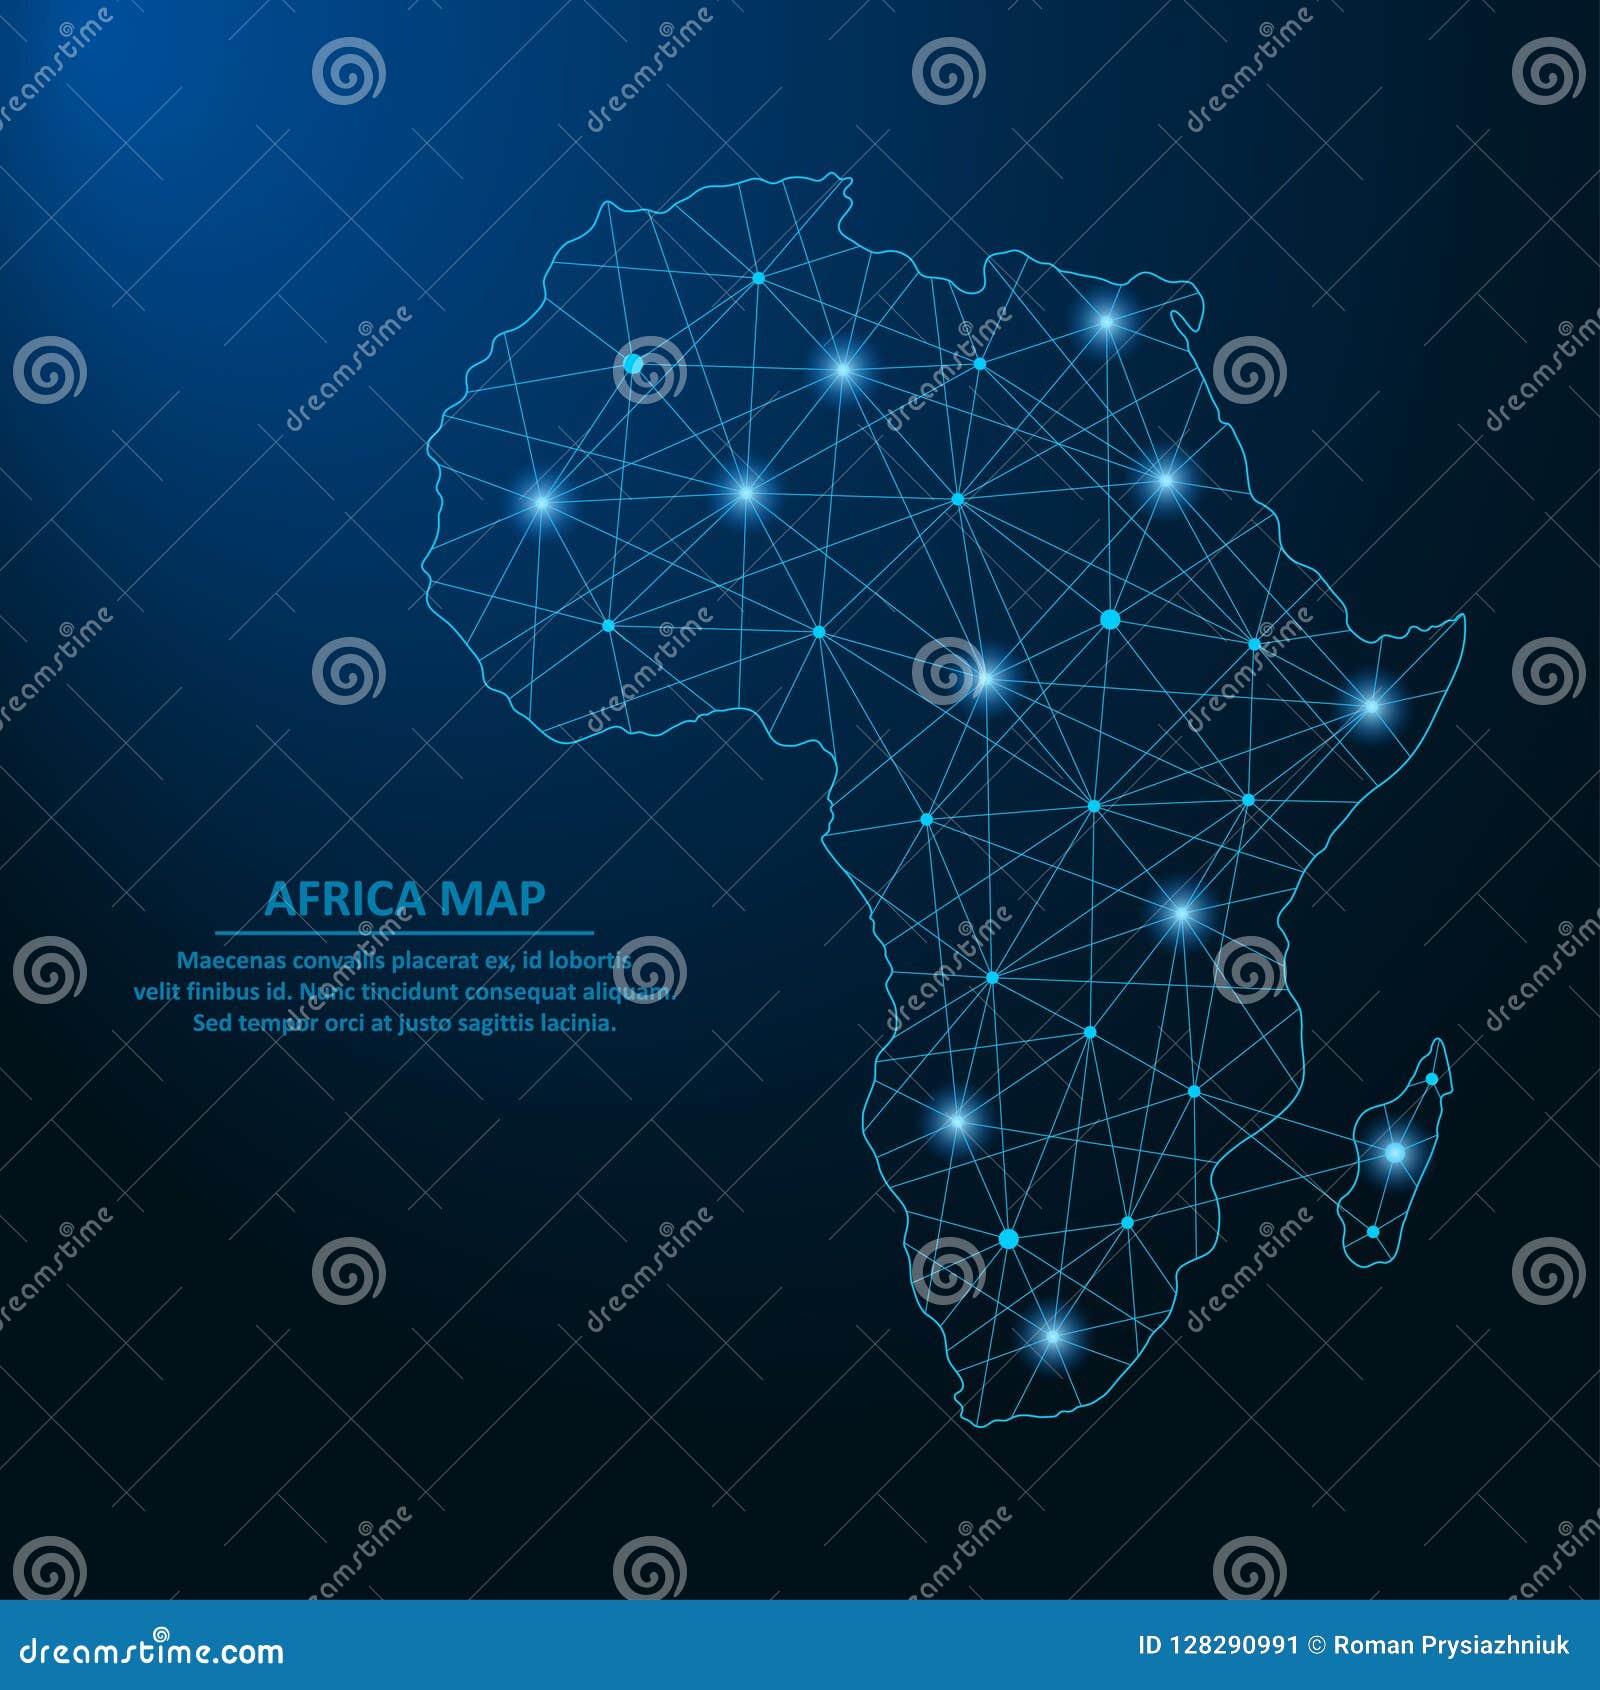 abstract africa map created from lines and bright points in the form of starry sky, polygonal wireframe mesh and connected lines.